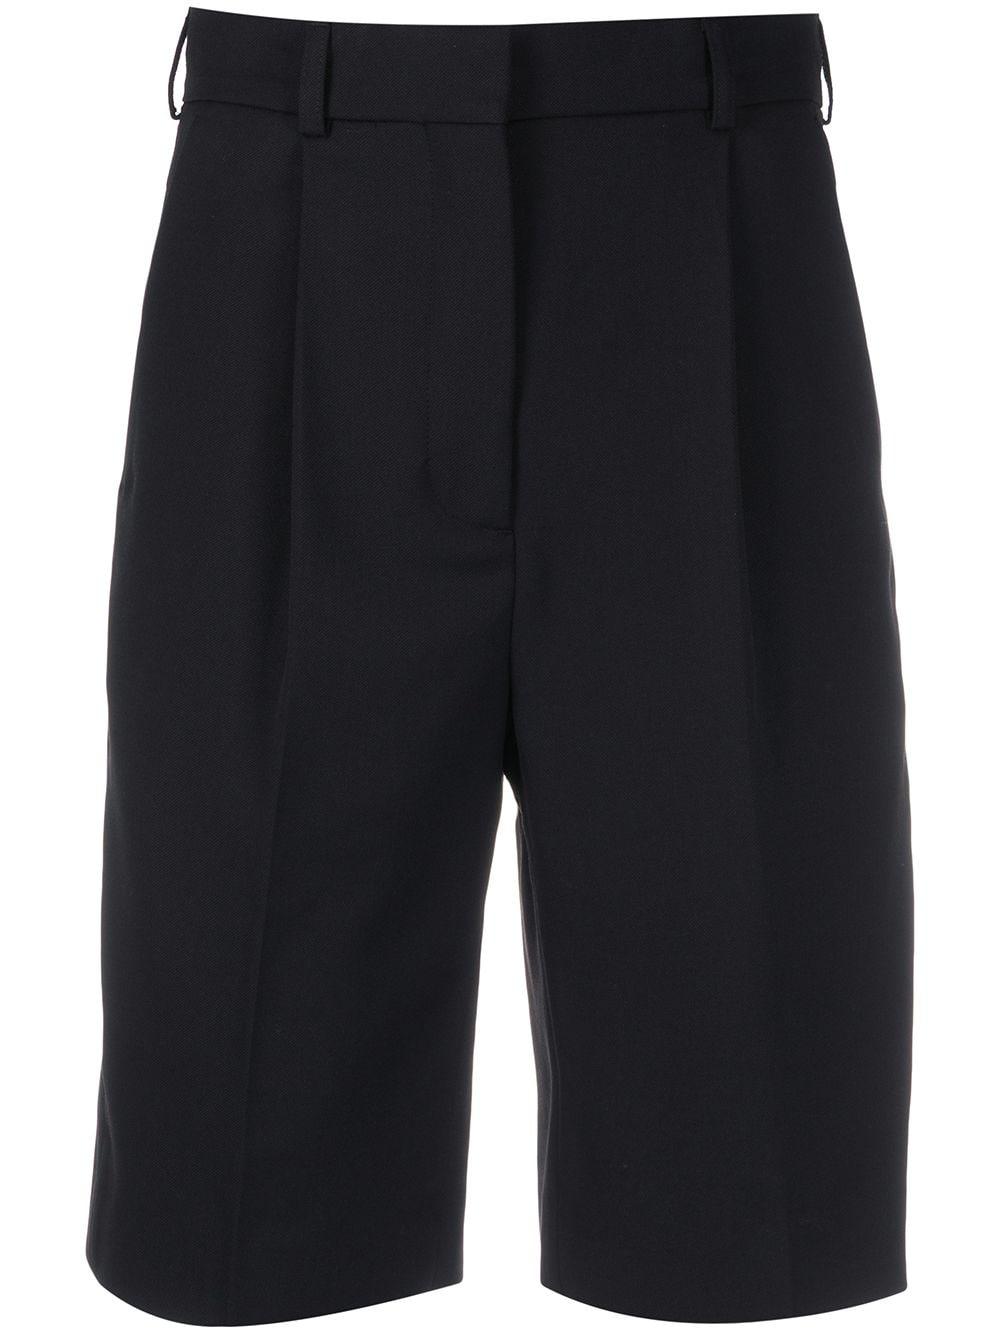 Acne Studios Wool Knee-length Tailored Shorts in Black - Lyst